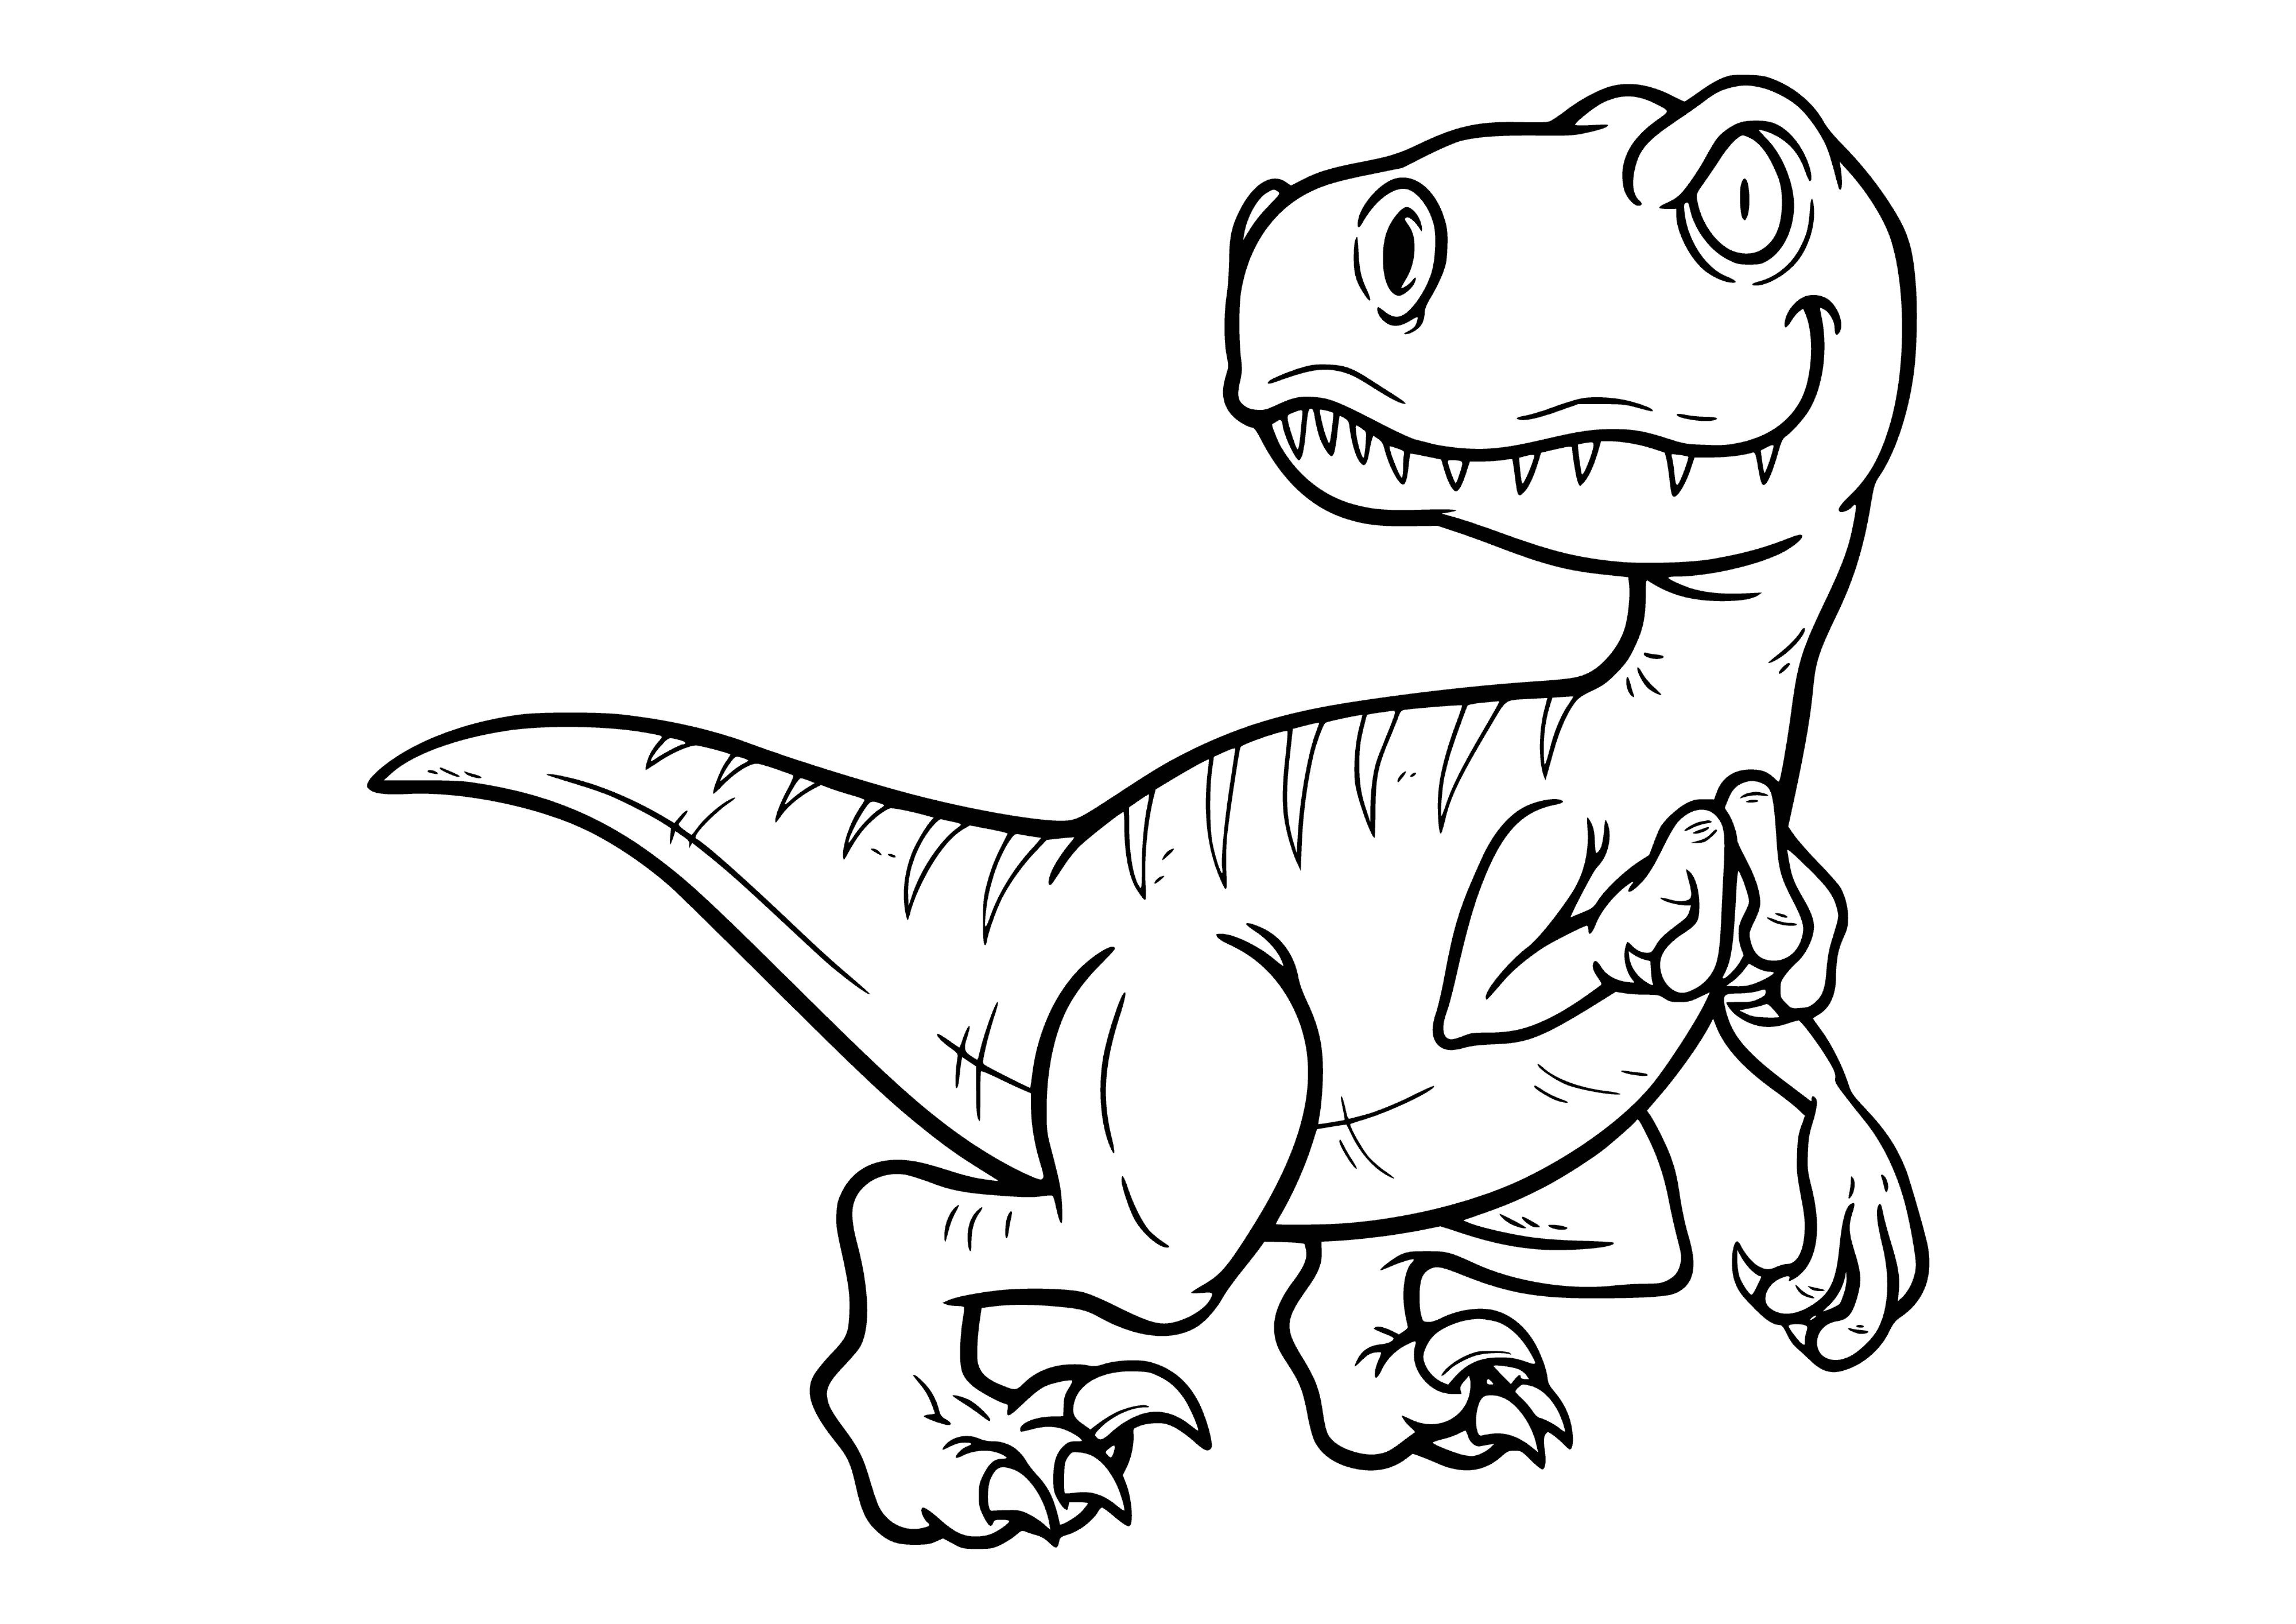 coloring page: Small, bird-like dinosaur with beak-like snout, large eyes, sharp claws, & feathers. Sharp teeth, long tail.